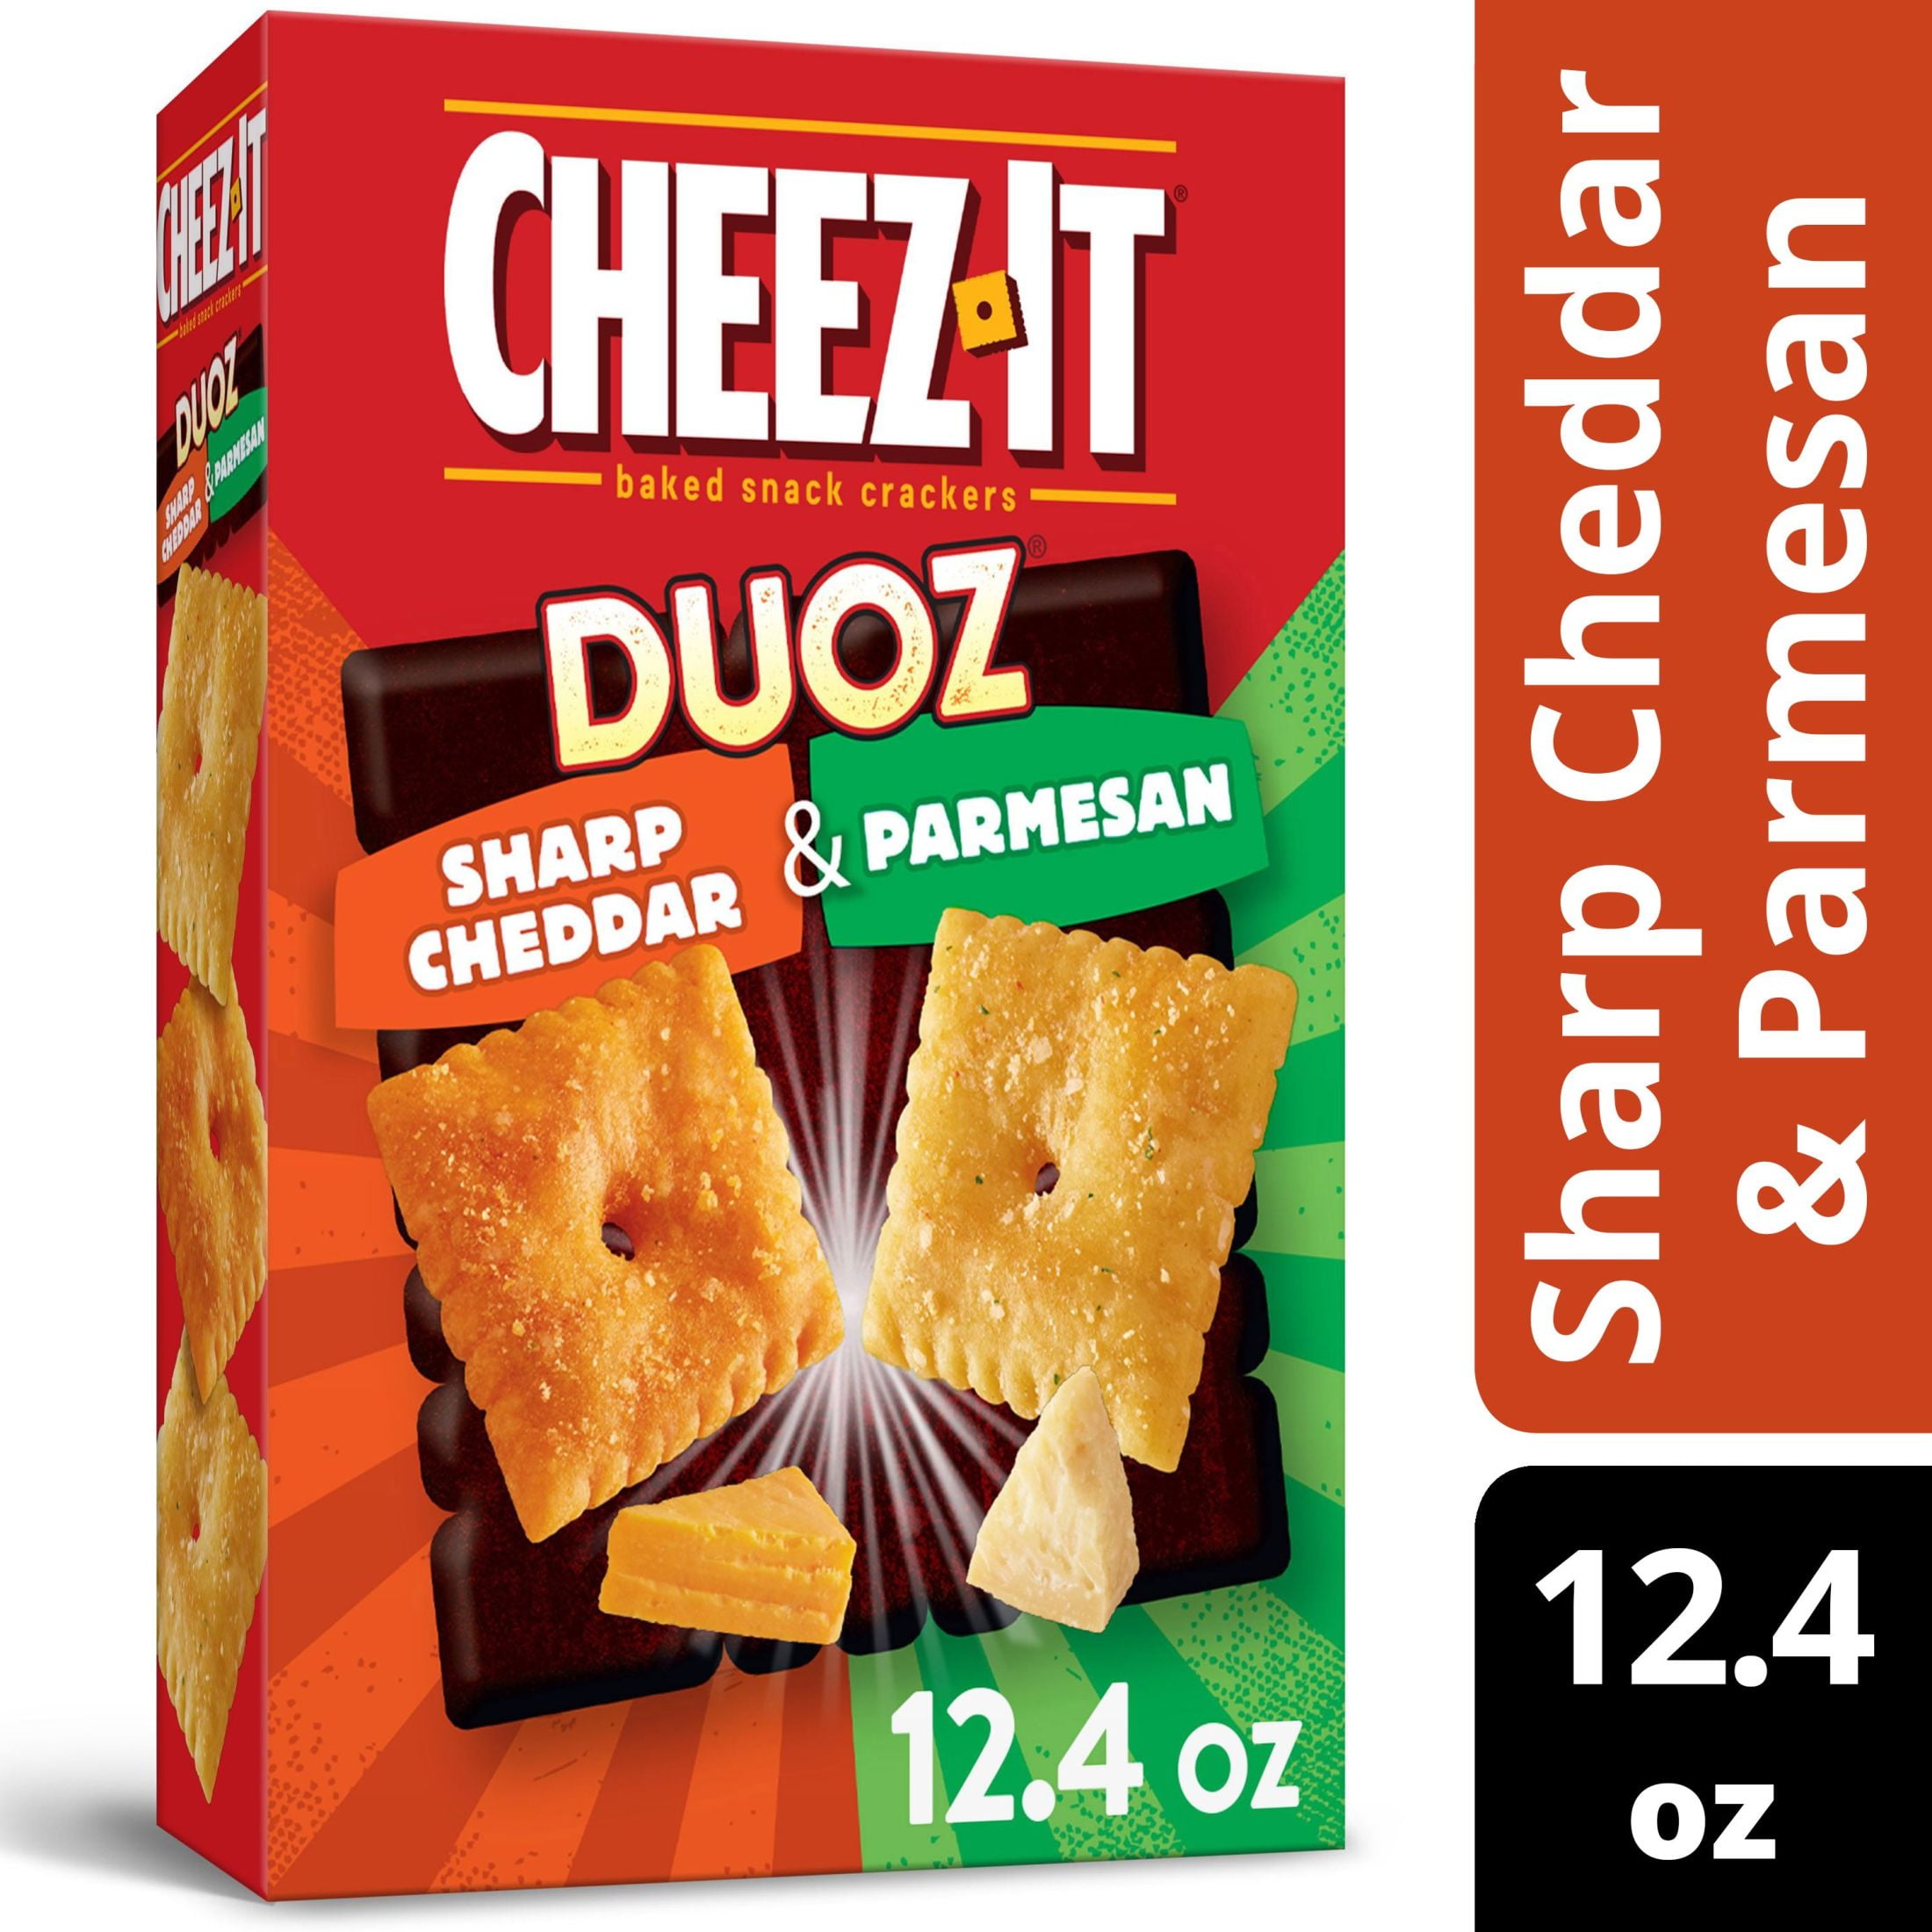 Cheez-It DUOZ Sharp Cheddar and Parmesan Cheese Crackers, Peanut-Free ...